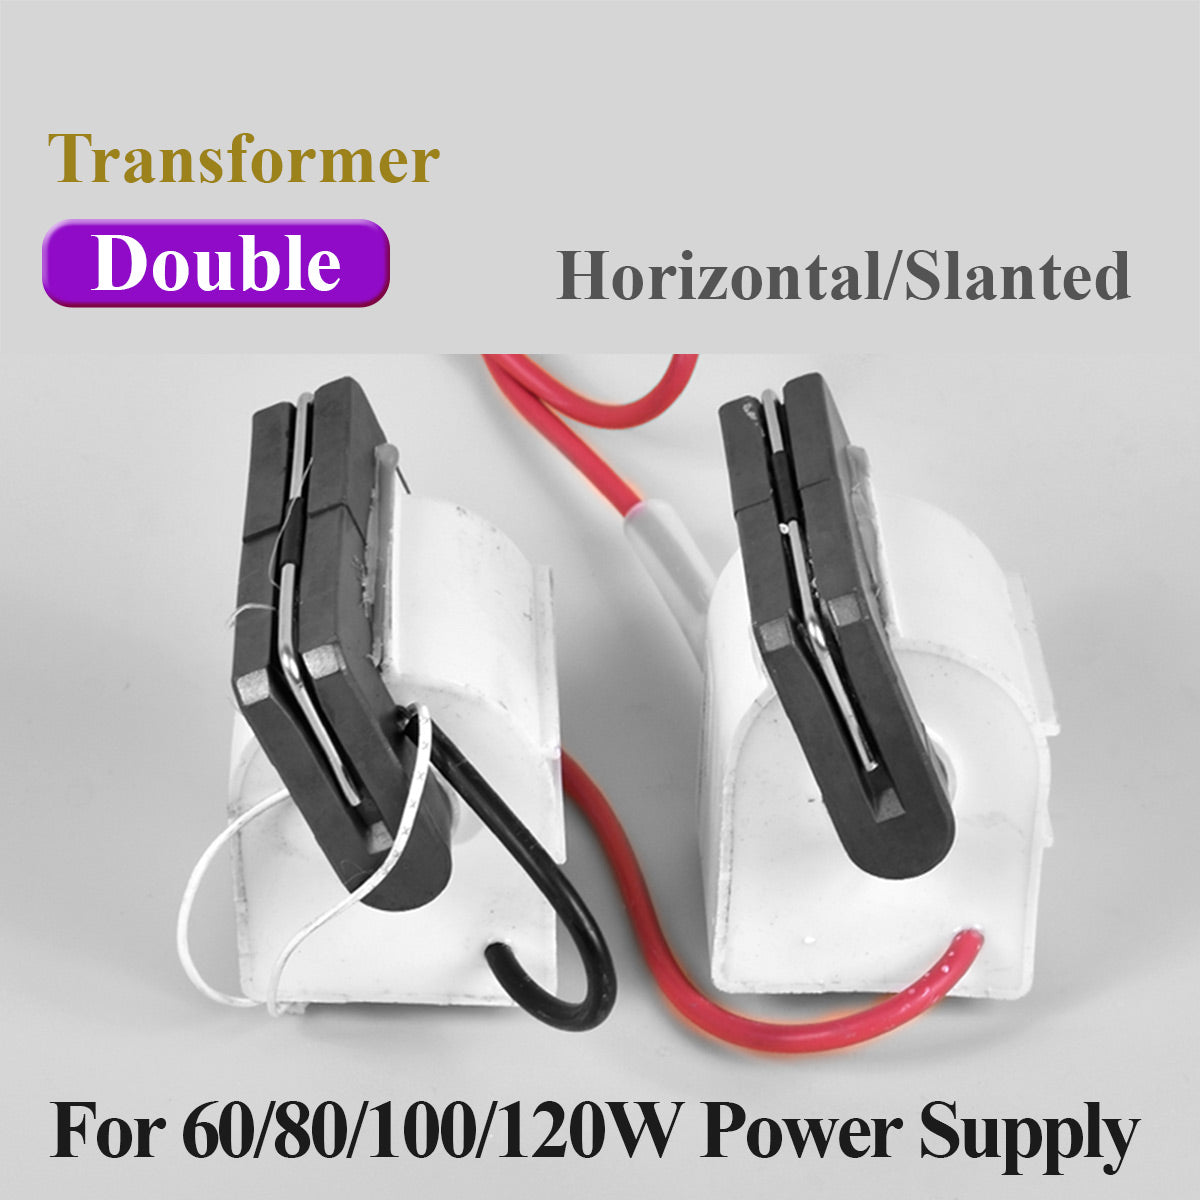 2Pcs/Lot Double Laser High Voltage Transformer Flyback Ignition Coil For 60W 80W 100W DY10 DY13 CO2 Laser Power Supply Parts